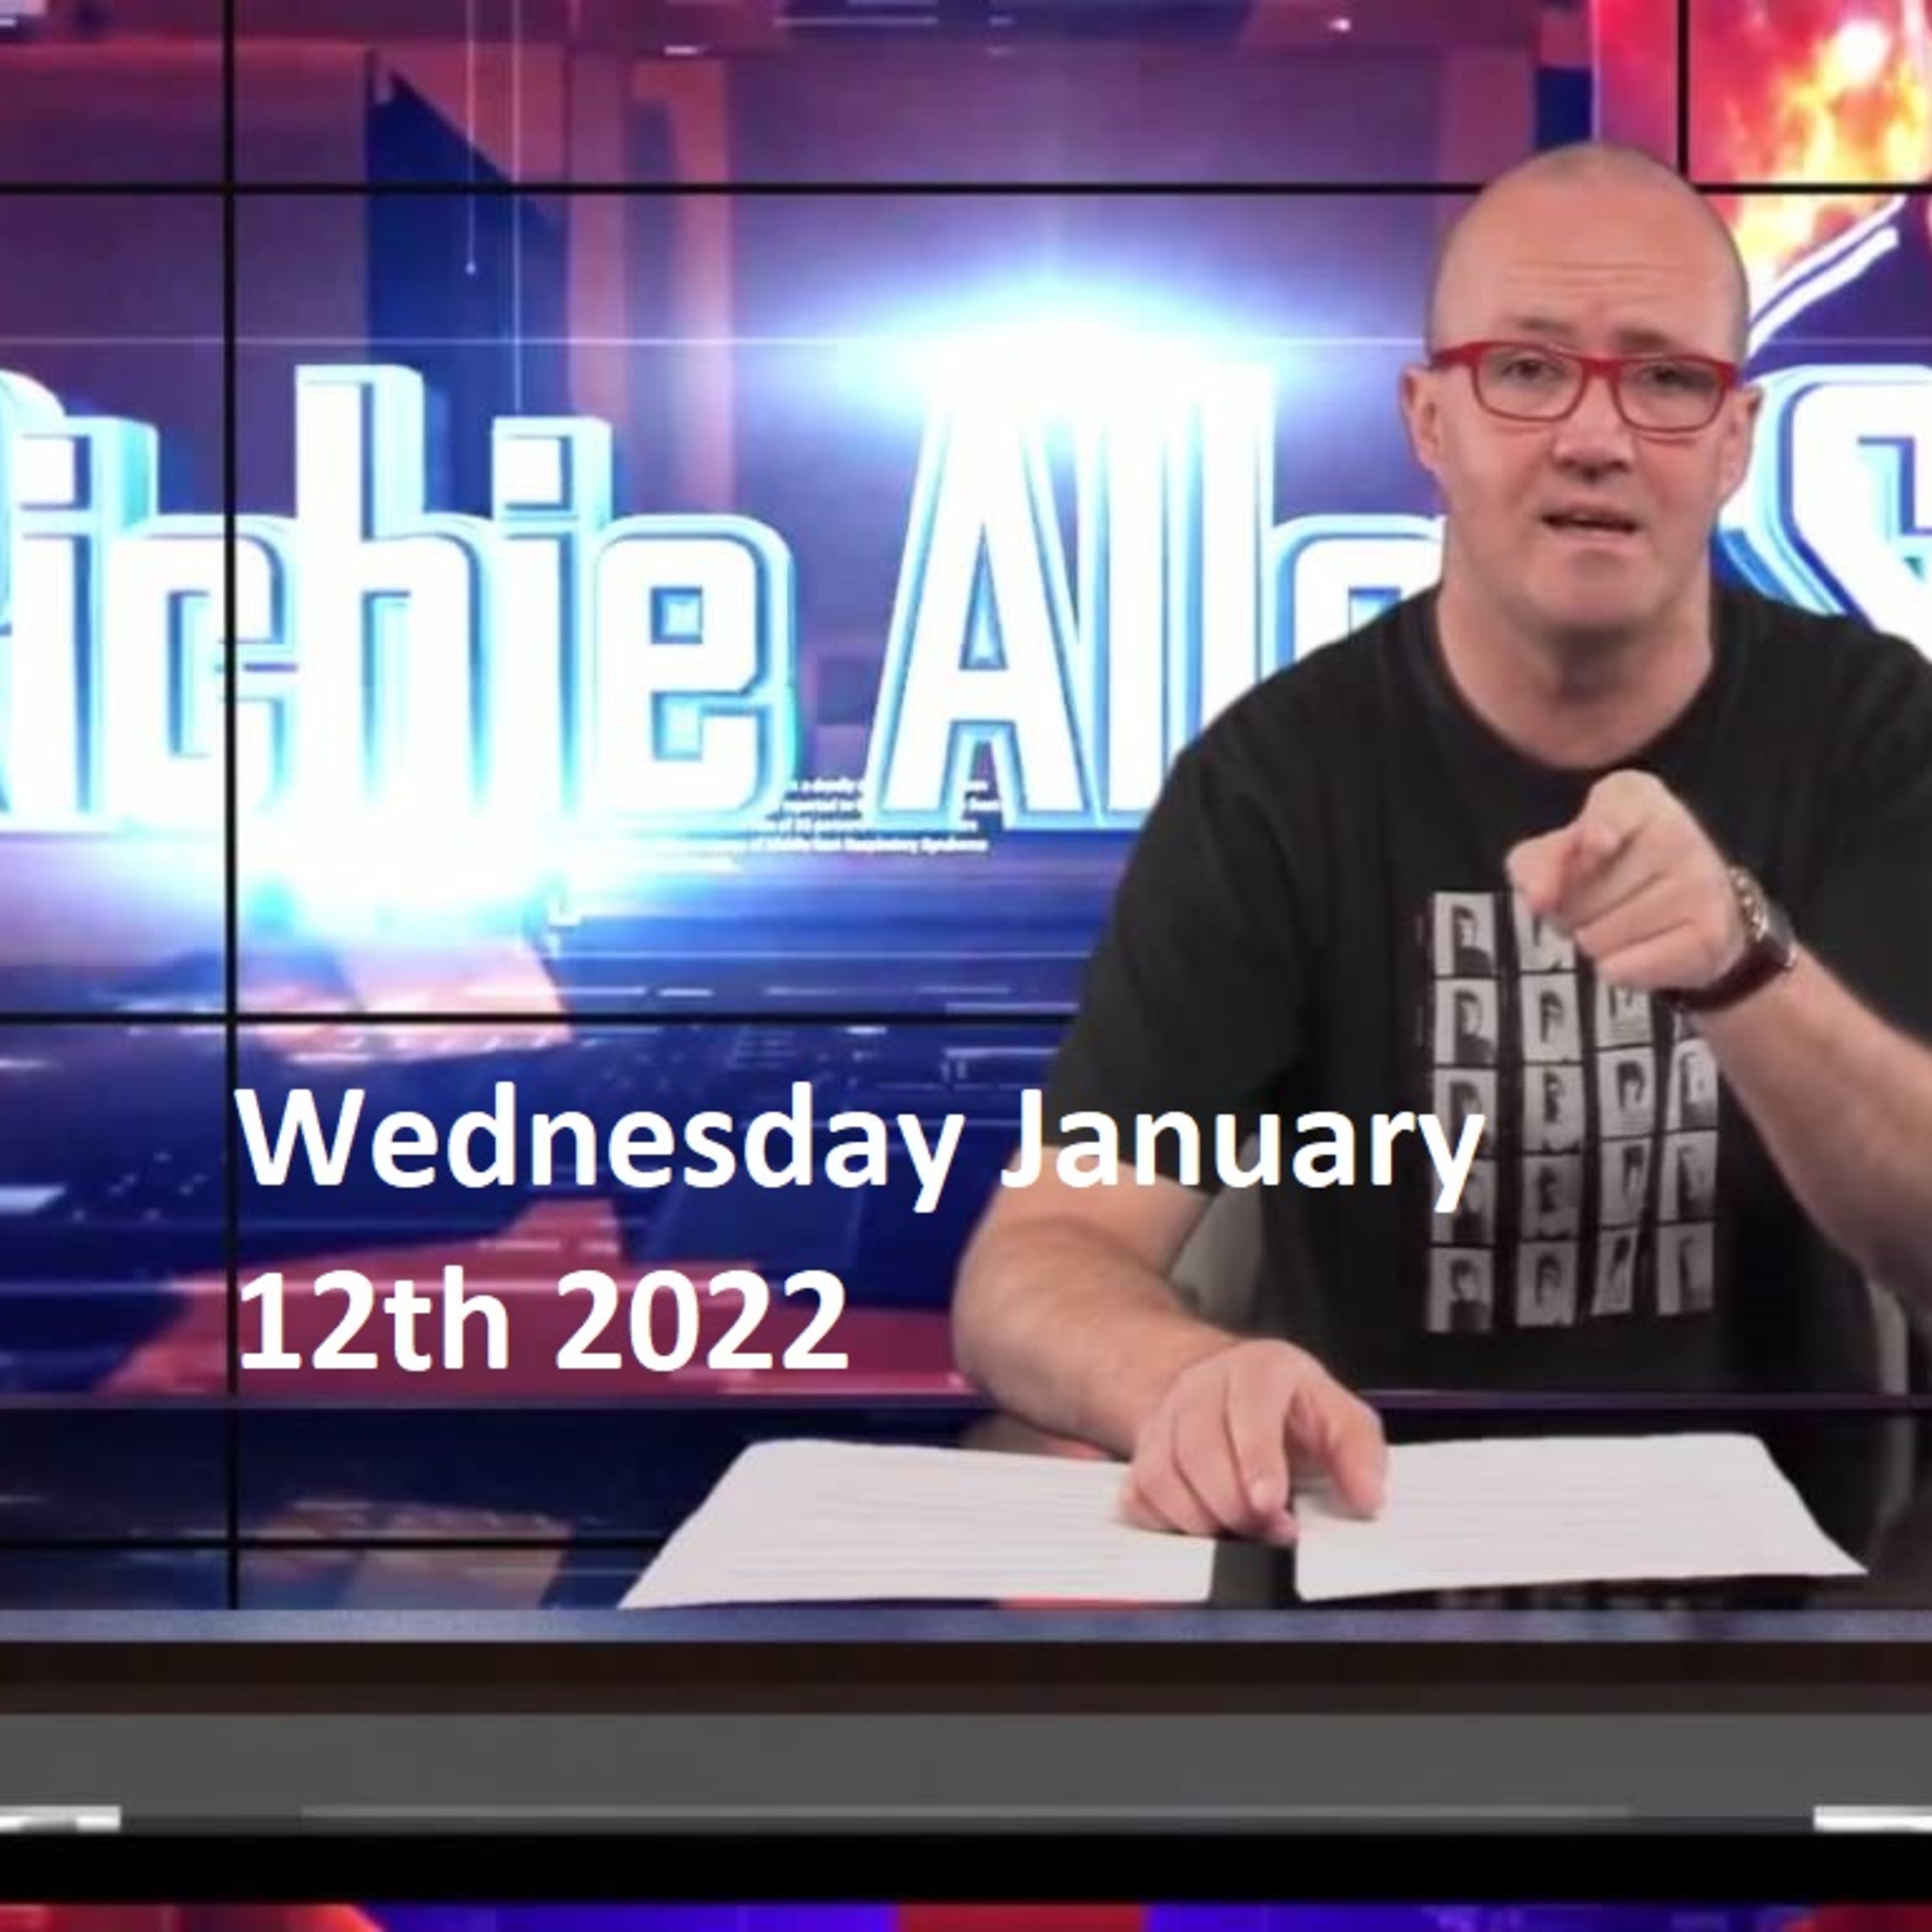 Episode 1388: The Richie Allen Show Wednesday January 12th 2022